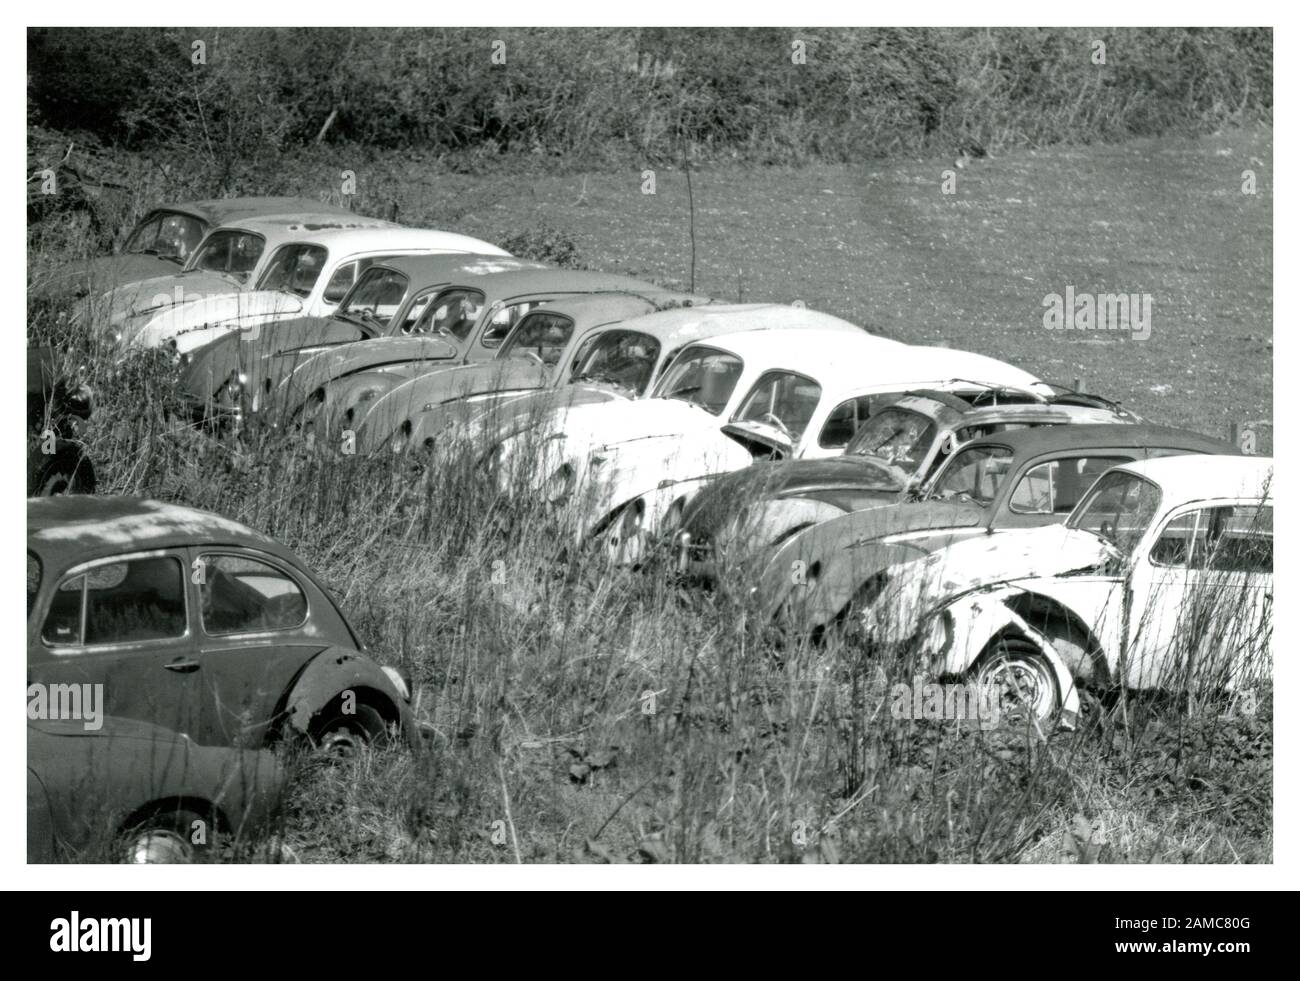 Line of scrapped Bug Beetles in a field, being stored for restoration, scrap or parts. Black and white historical image. UK Stock Photo